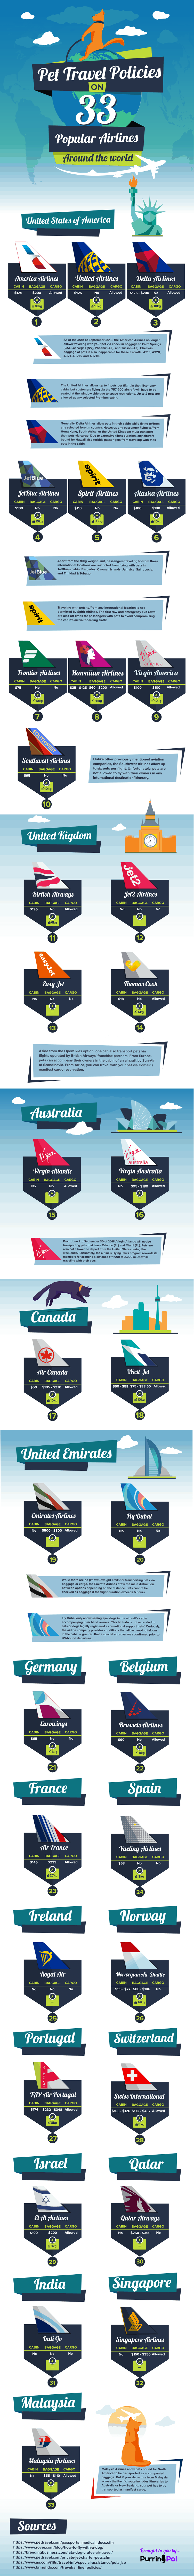 Pet travel rates in airlines